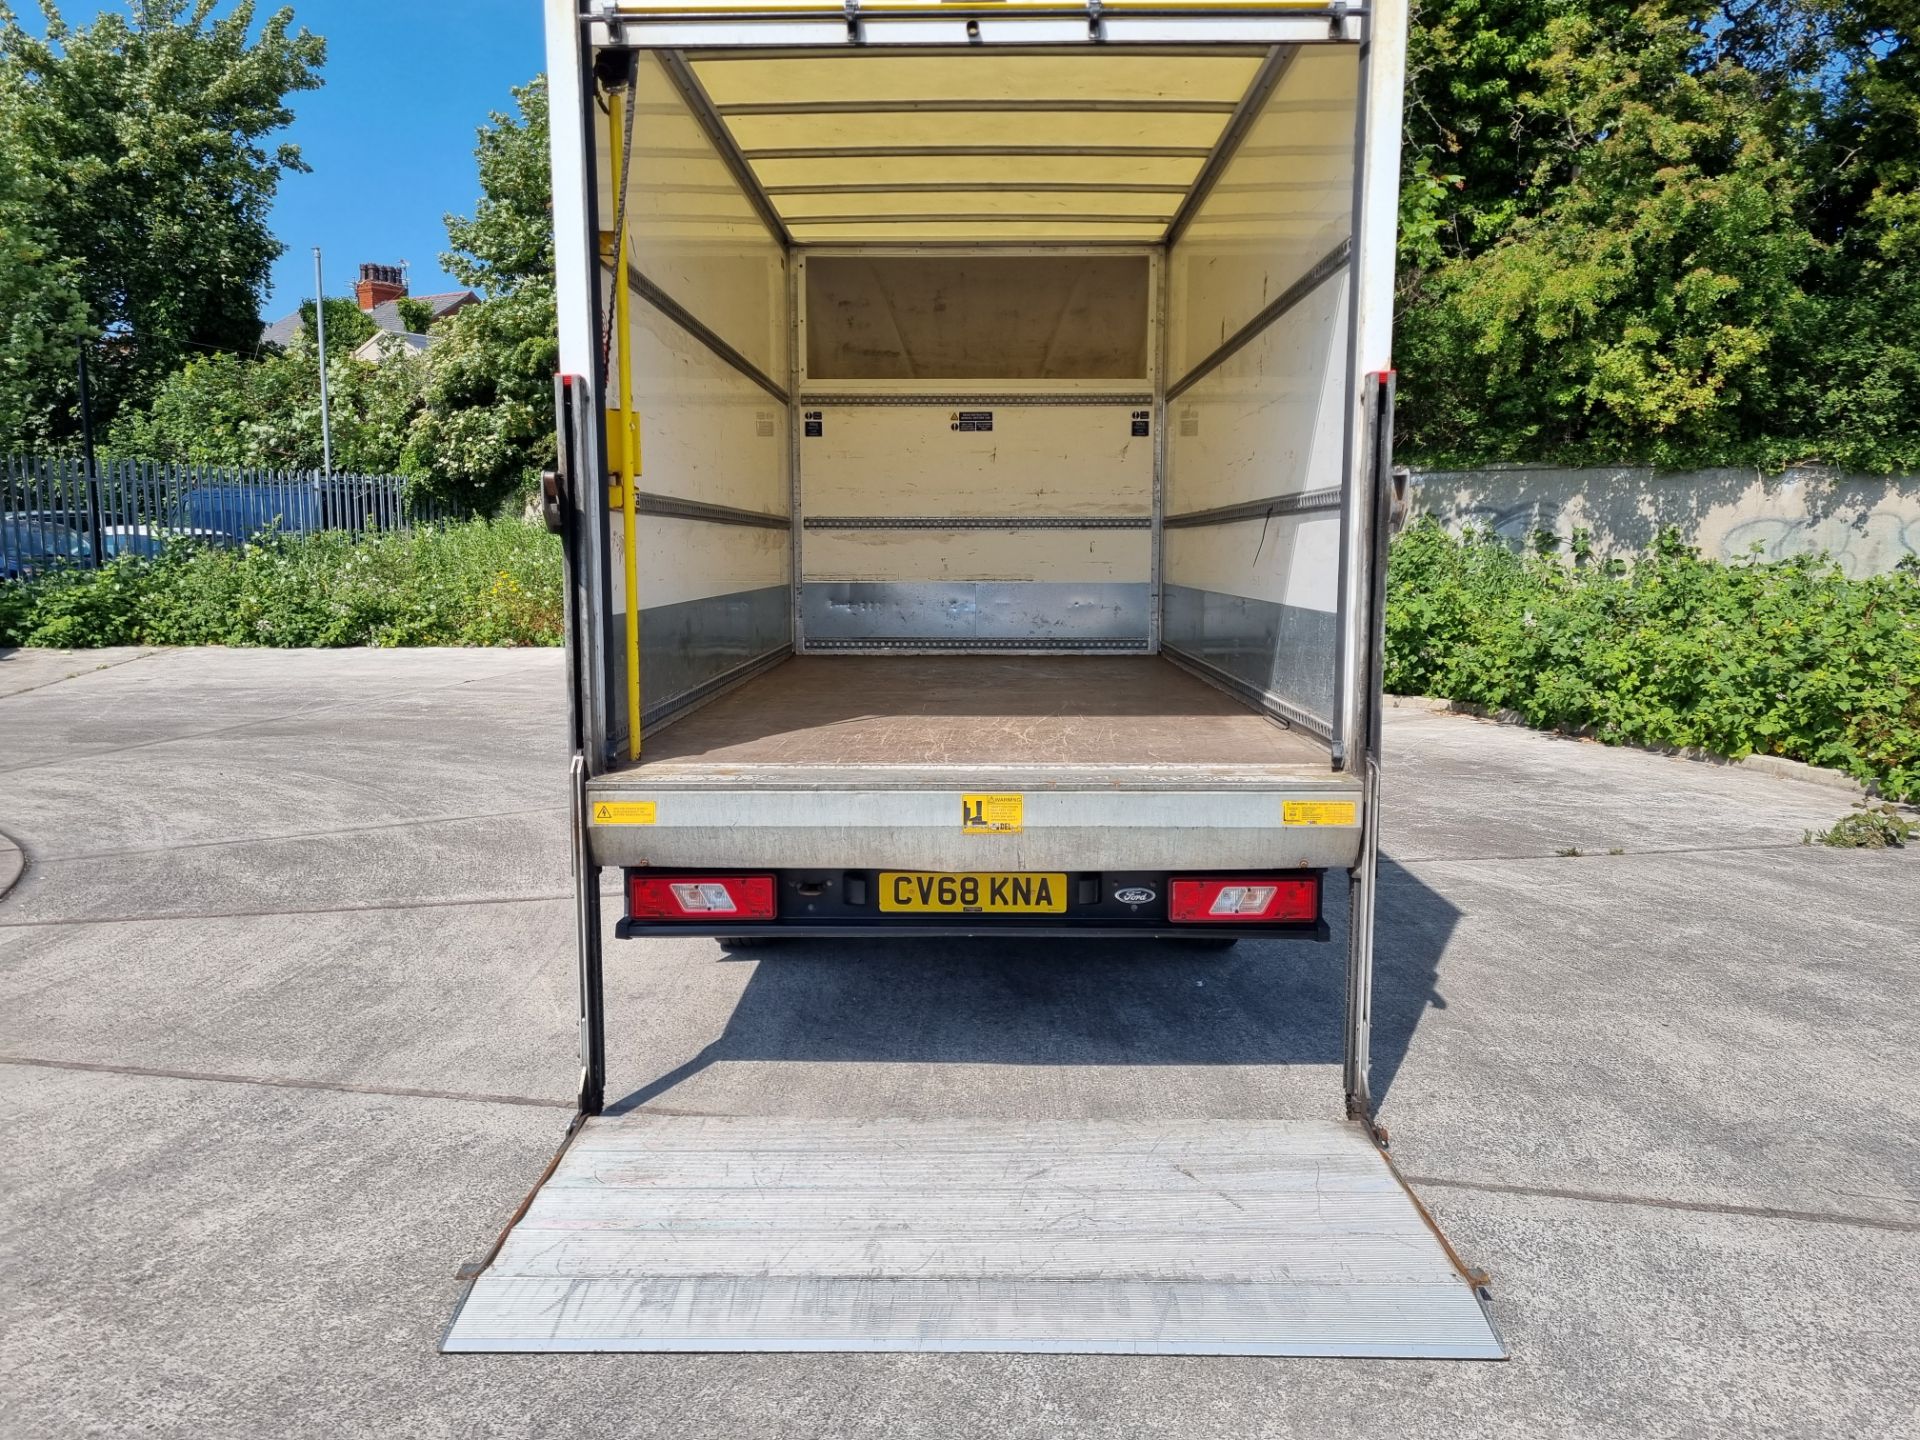 2018 Transit Luton with tail lift - Image 12 of 13